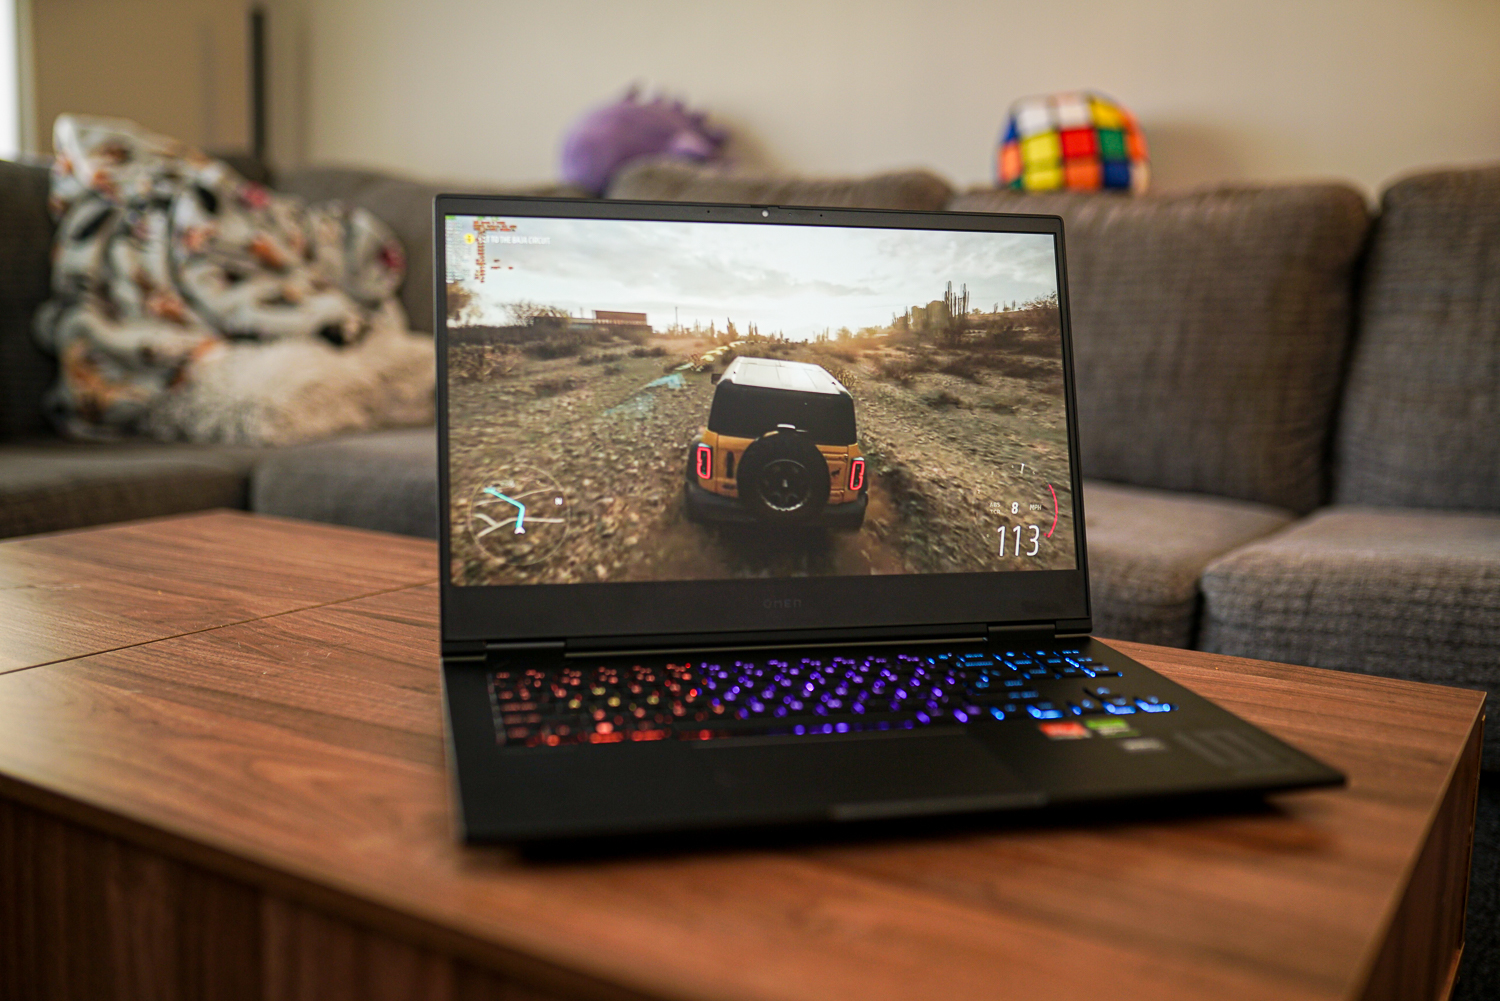 HP Omen (17-inch) review: High-performance gaming minus the flashy